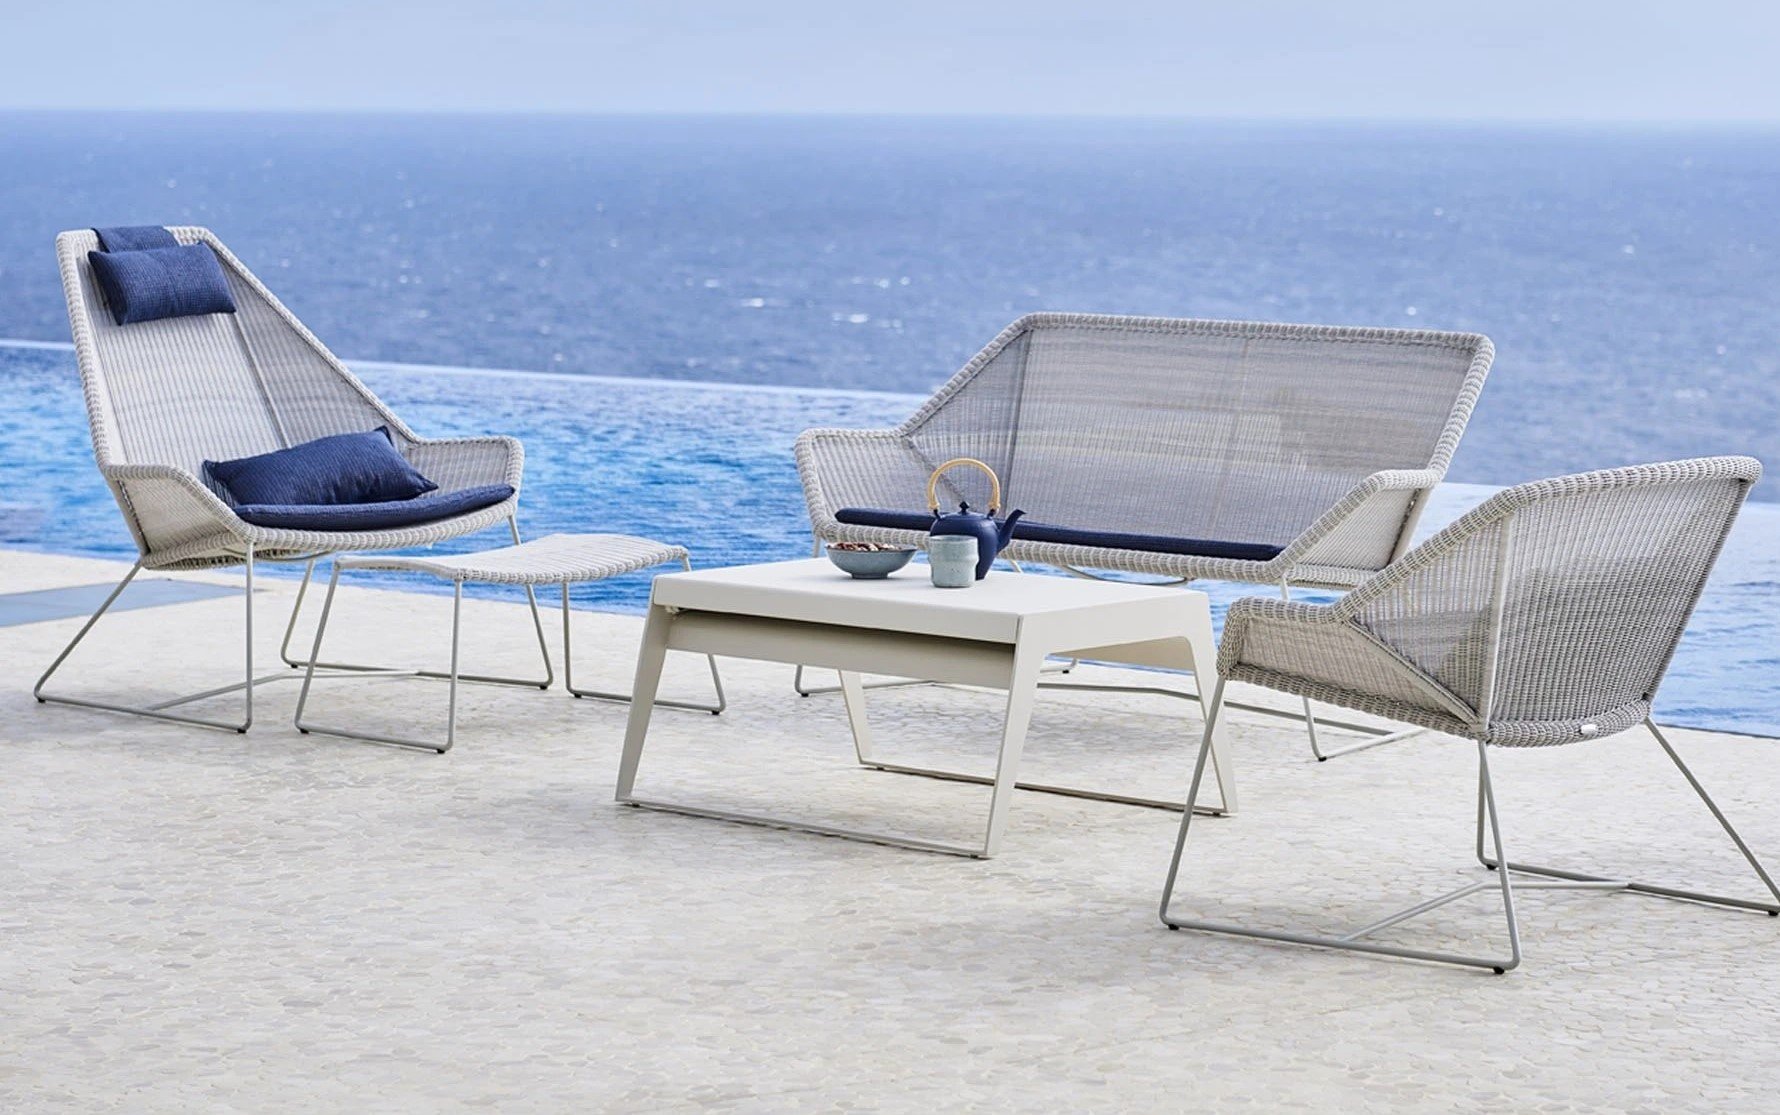 Breeze 2-Seater Sofa from Cane-line, designed by Strand+Hvass